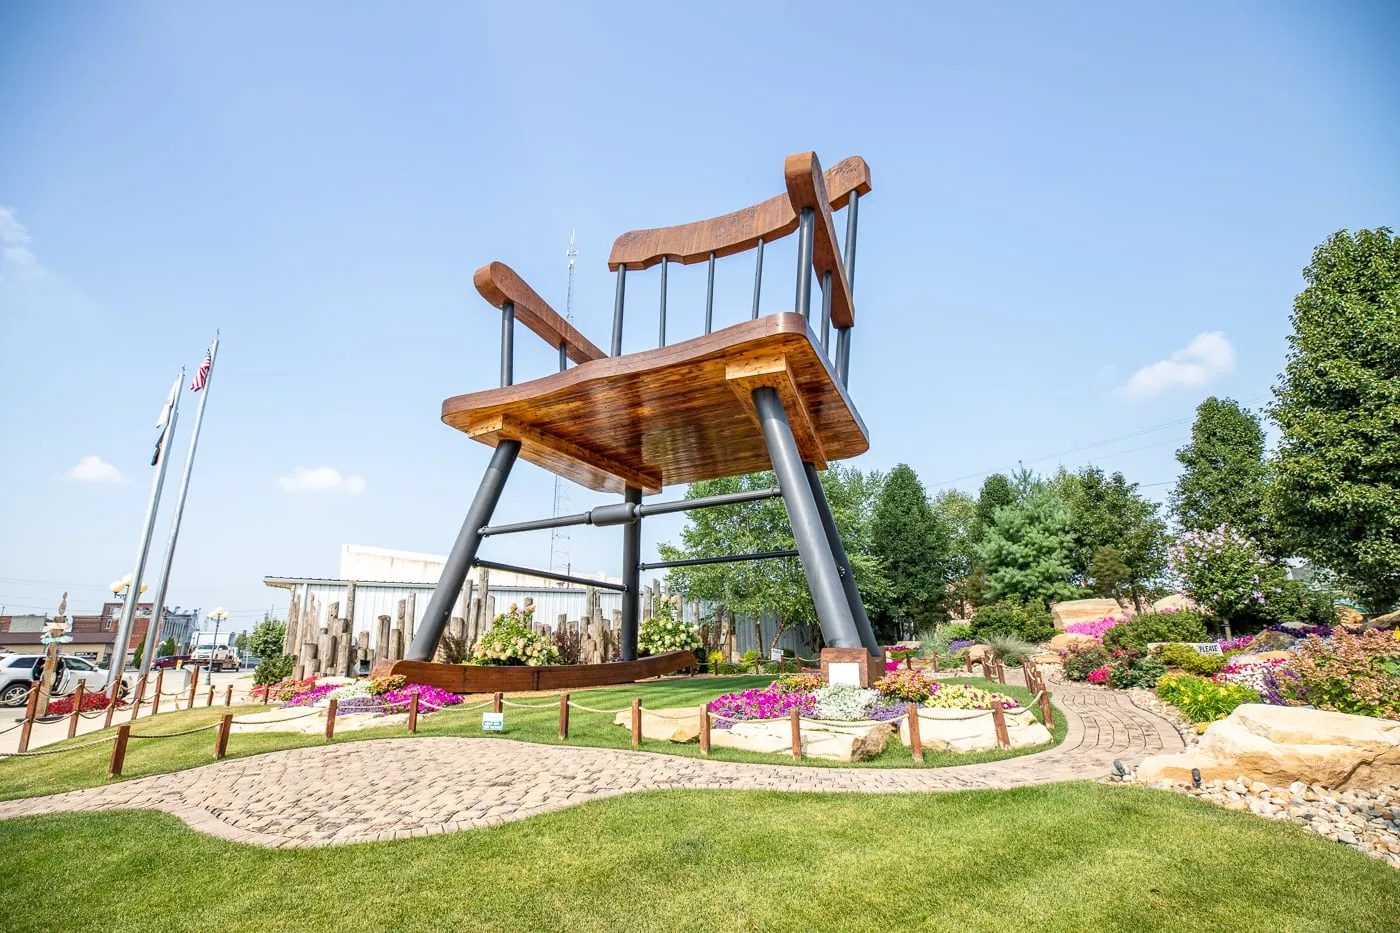 World's Largest Rocking Chair in Casey, Illinois roadside attraction